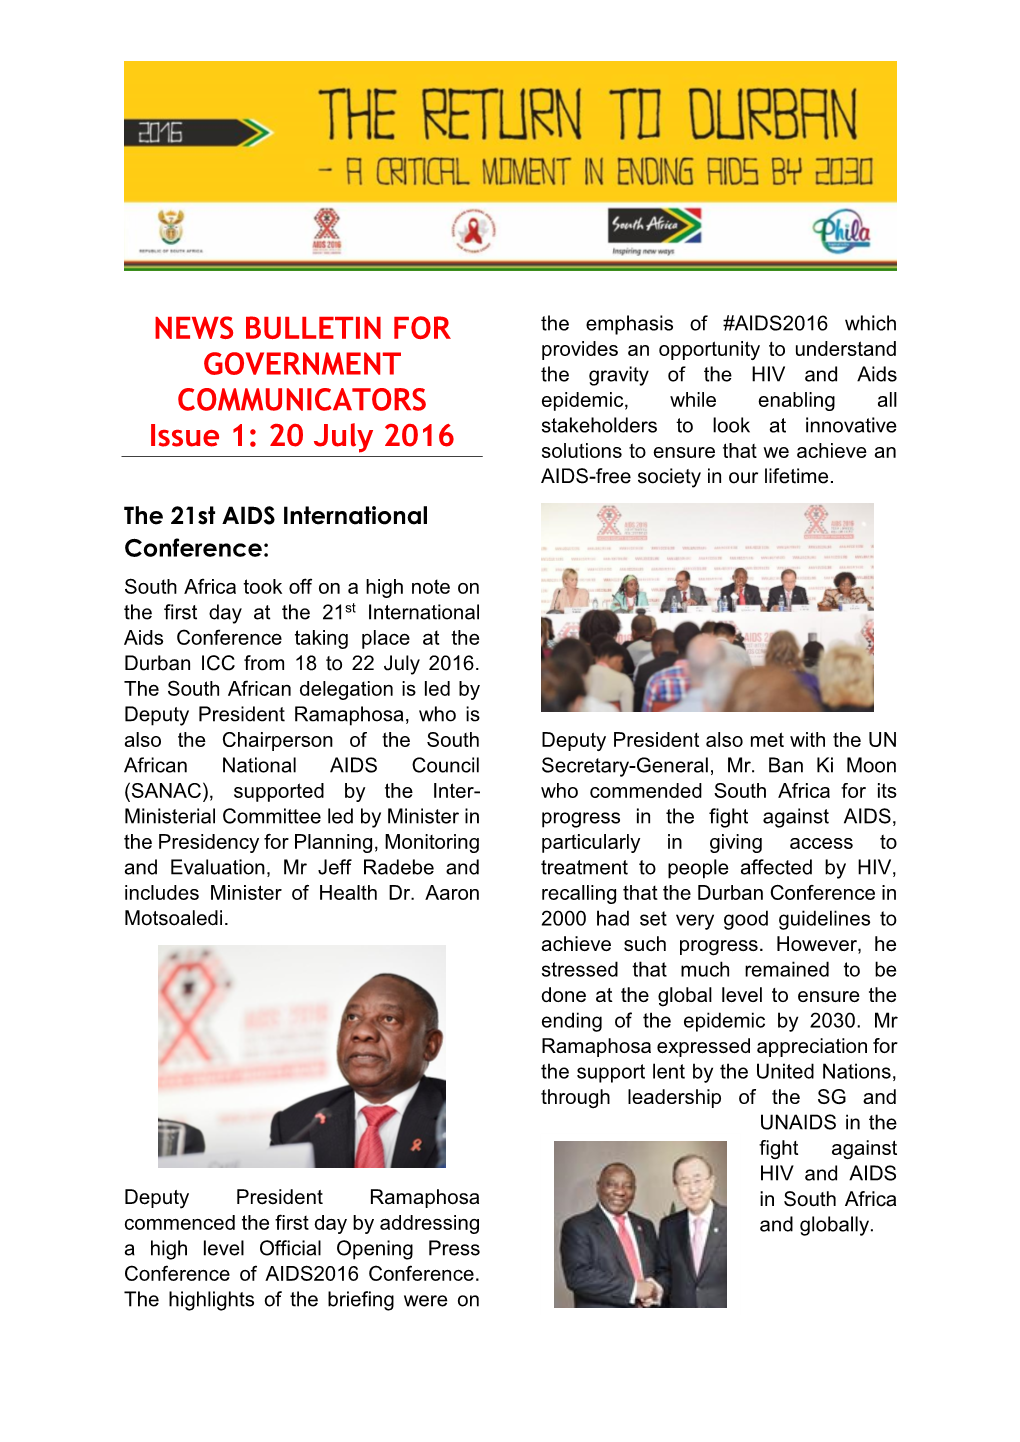 Aids Conference Taking Place at the Durban ICC from 18 to 22 July 2016